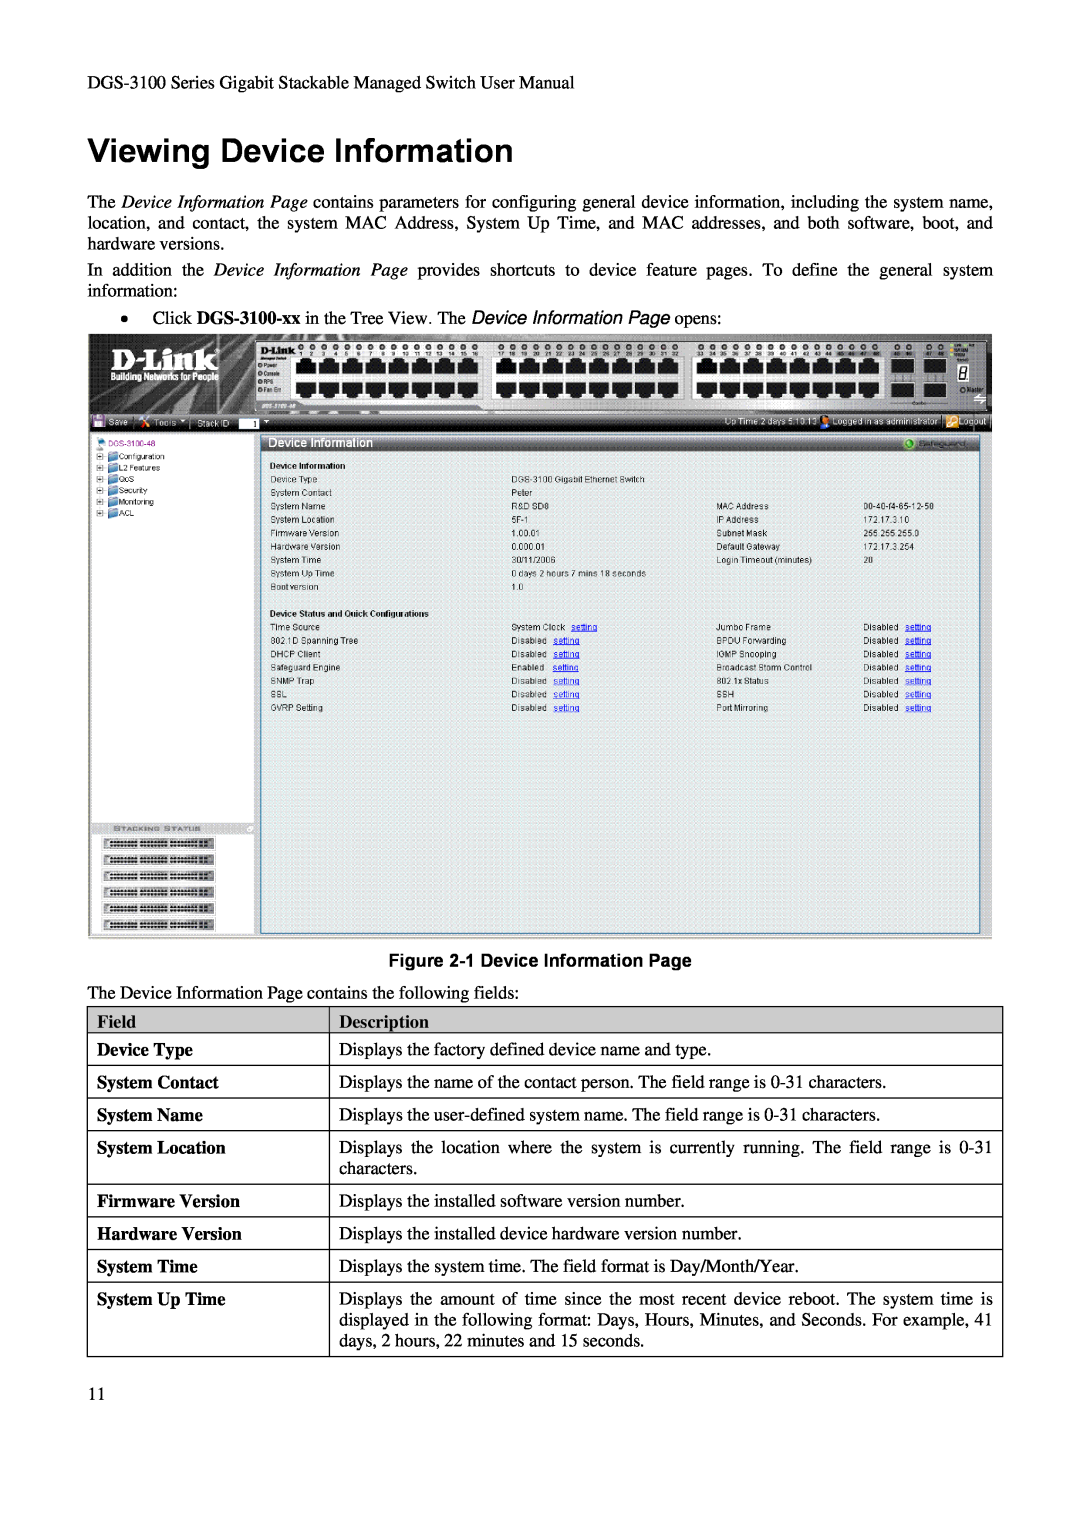 D-Link DGS-3100 user manual Viewing Device Information, 1 Device Information Page, Description 